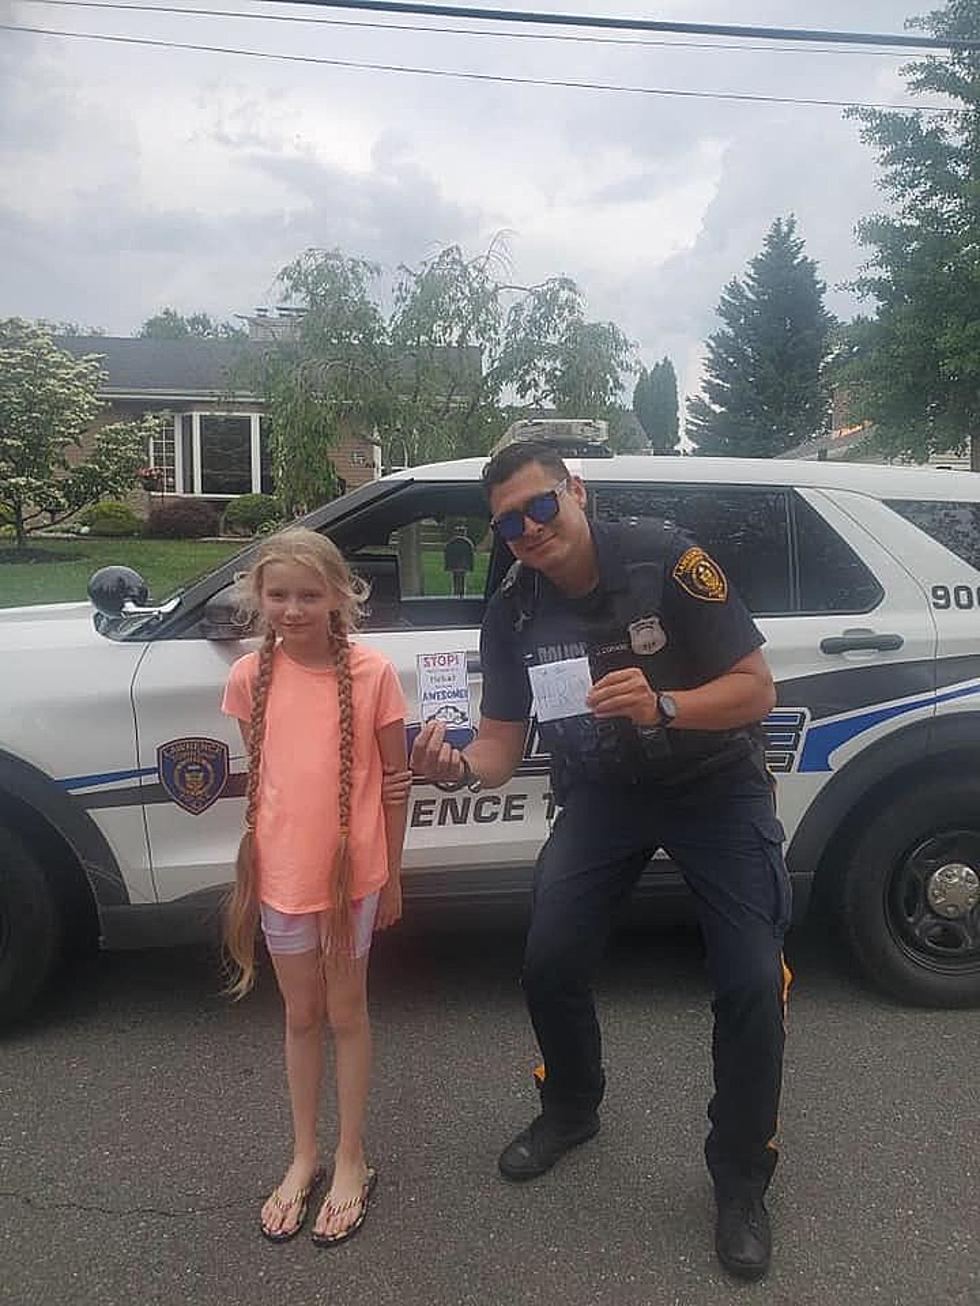 Lawrence, NJ Police Officer Ticketed for “Being Awesome” By Local Girl